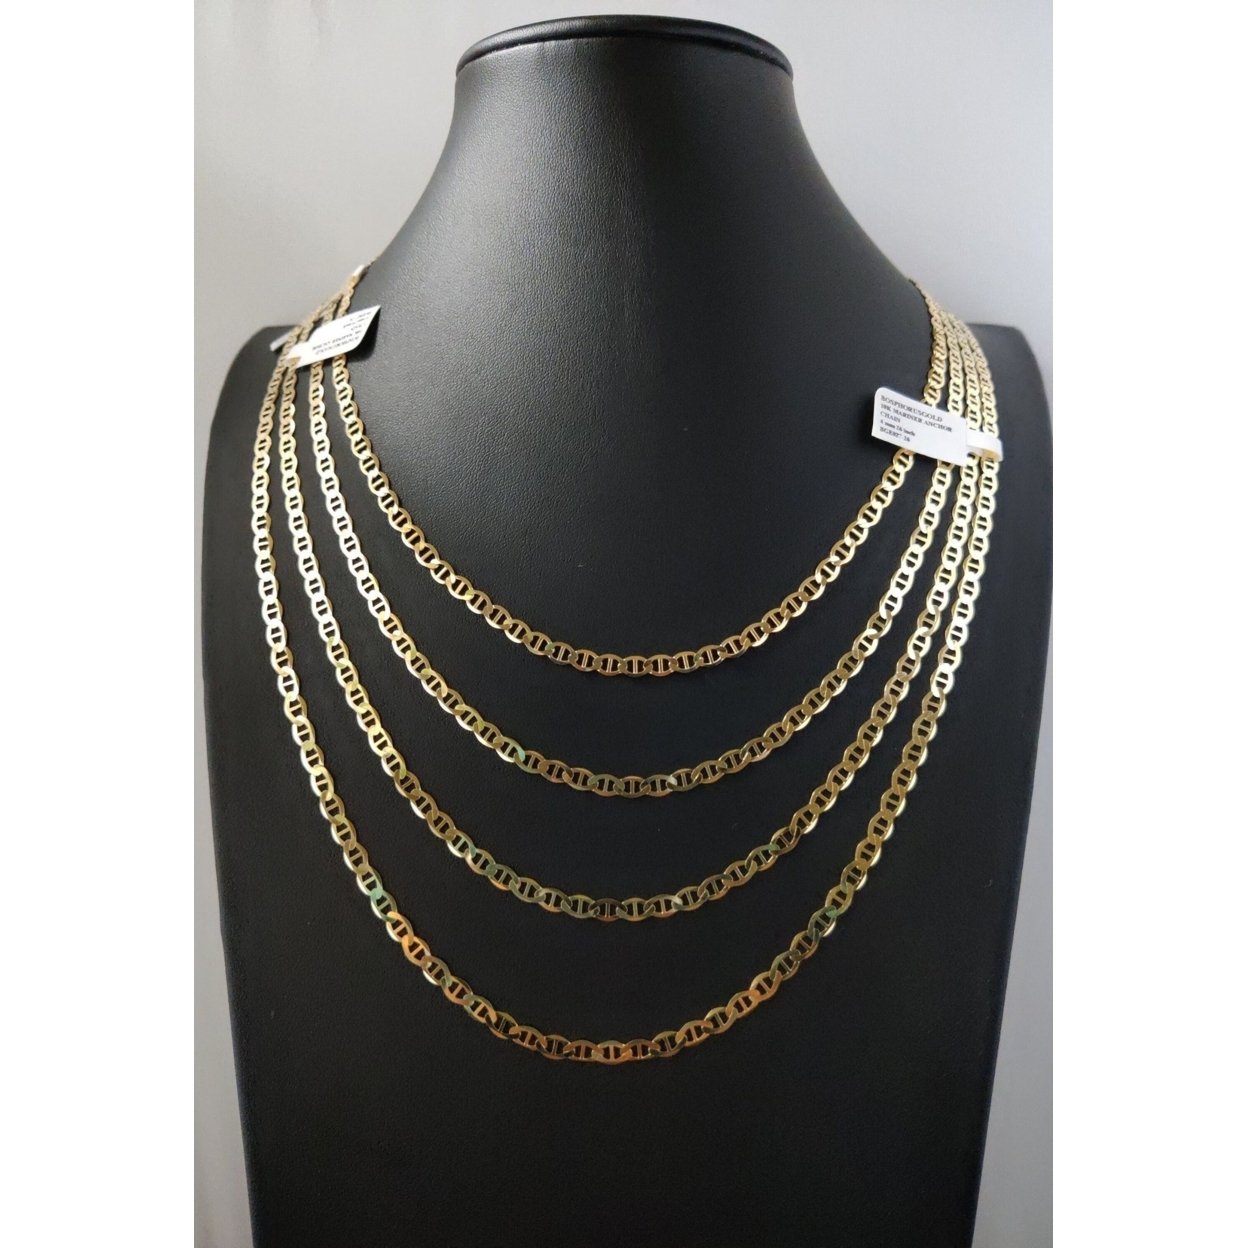 Yellow Gold Filled High Polish Finsh Chain Necklace,Mariner Chain Necklace,Necklace,Gold Necklace, Mariner Necklace, - 18''